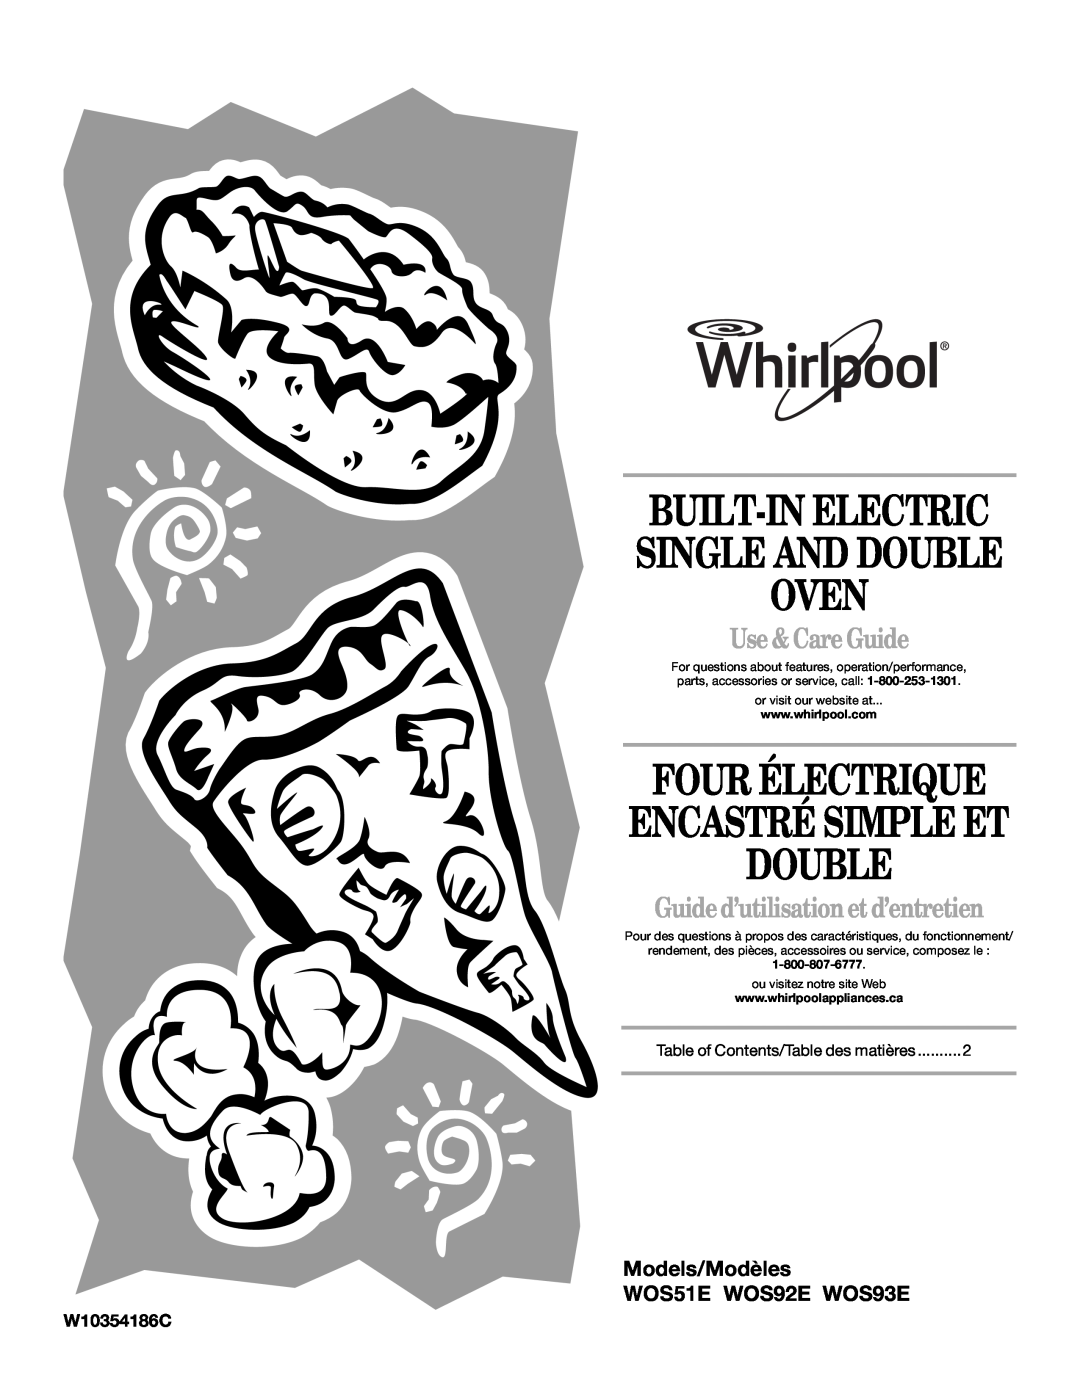 Whirlpool WOS92EC7AW manual W10354186C, Built-In Electric, Oven, Four Électrique, Single And Double, Use & Care Guide 